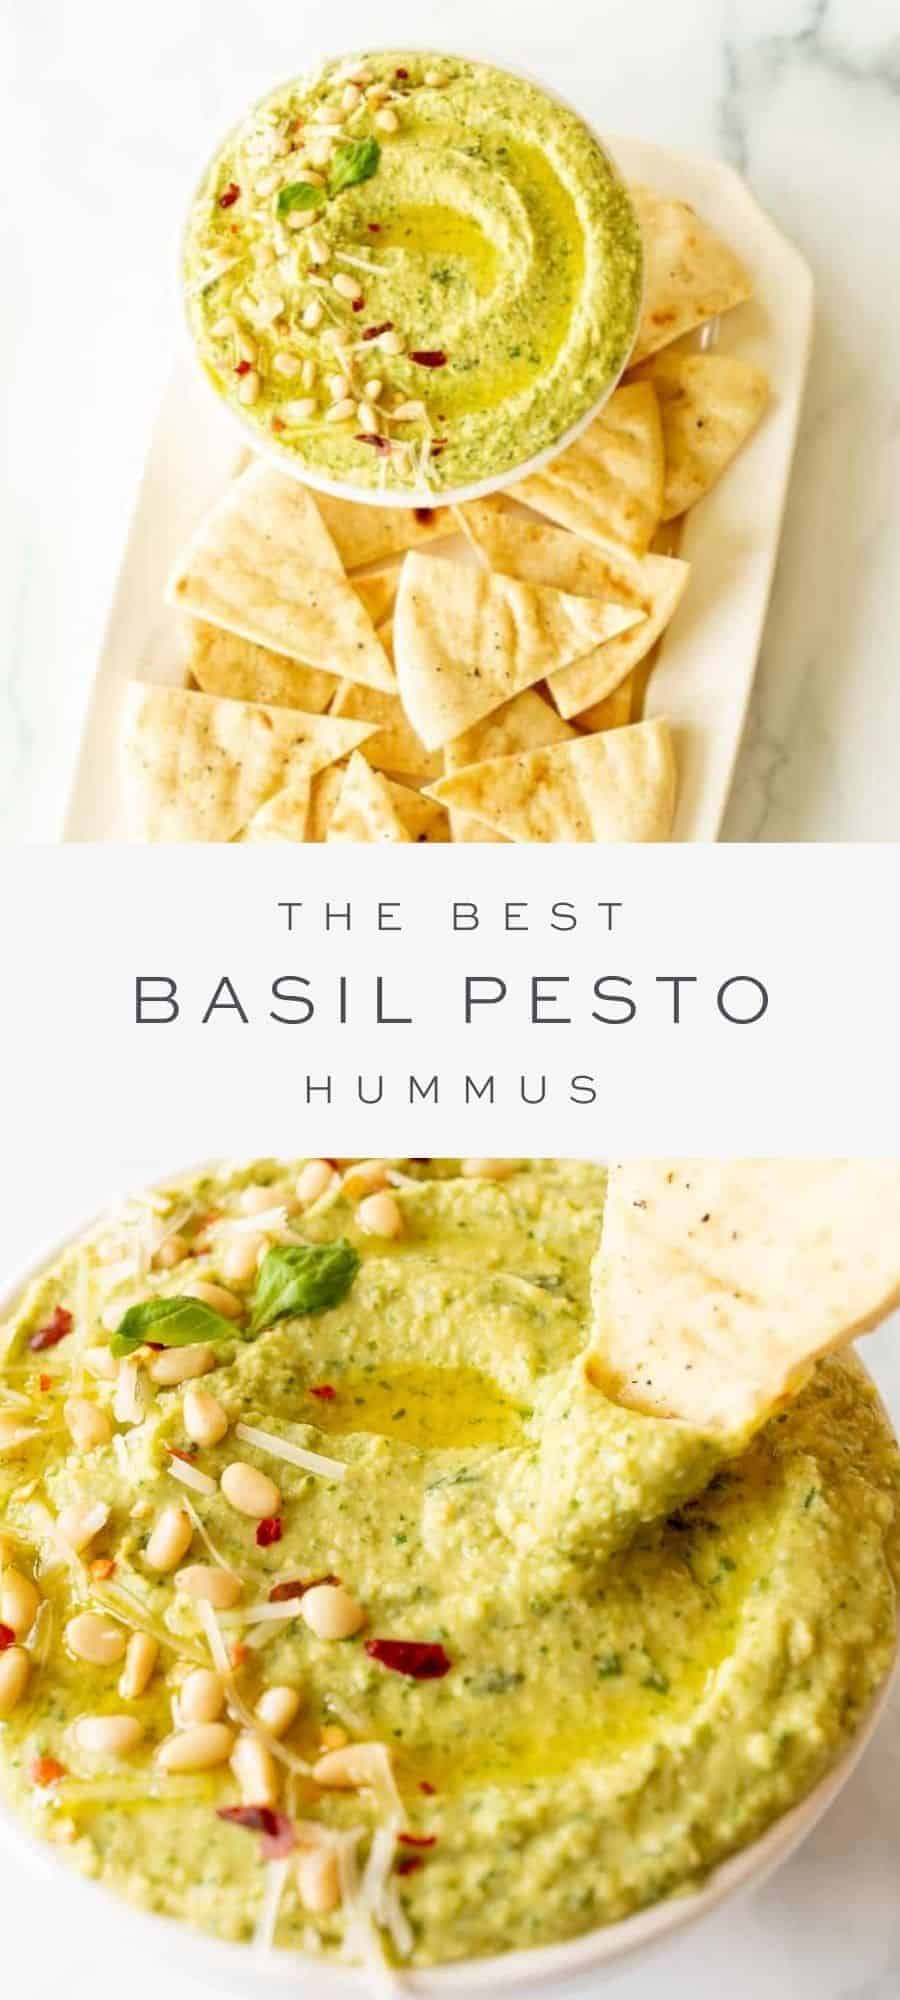 basil pesto hummus in bowl surrounded by pita chips, overlay text, close up of chip dipping into pesto hummus